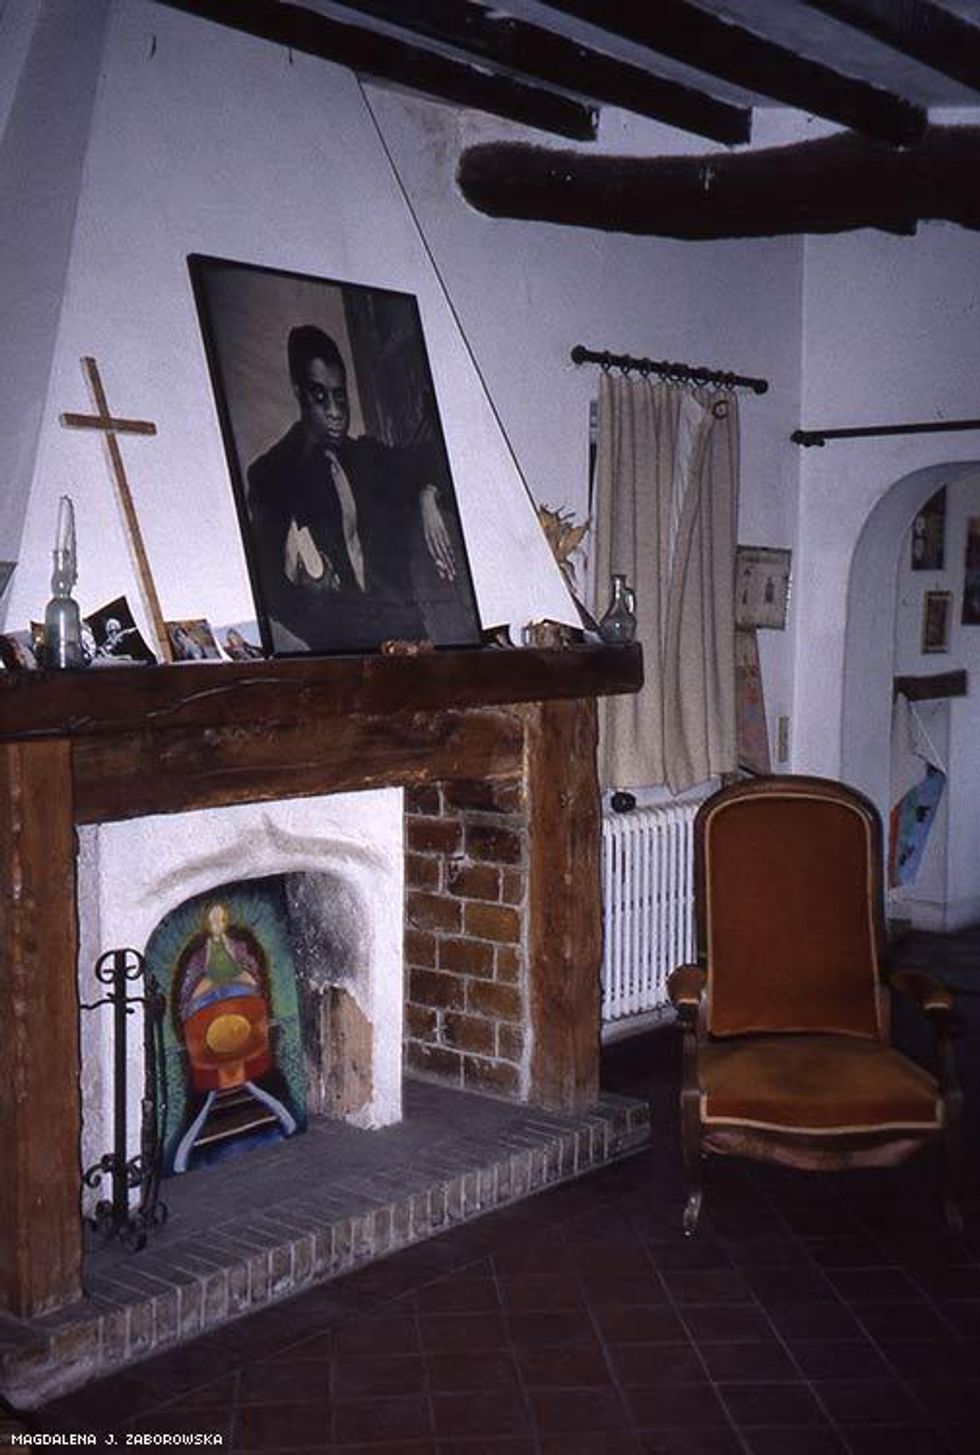 The upstairs living room with Baldwin\u2019s portrait, a cross, and mantelpiece collage.